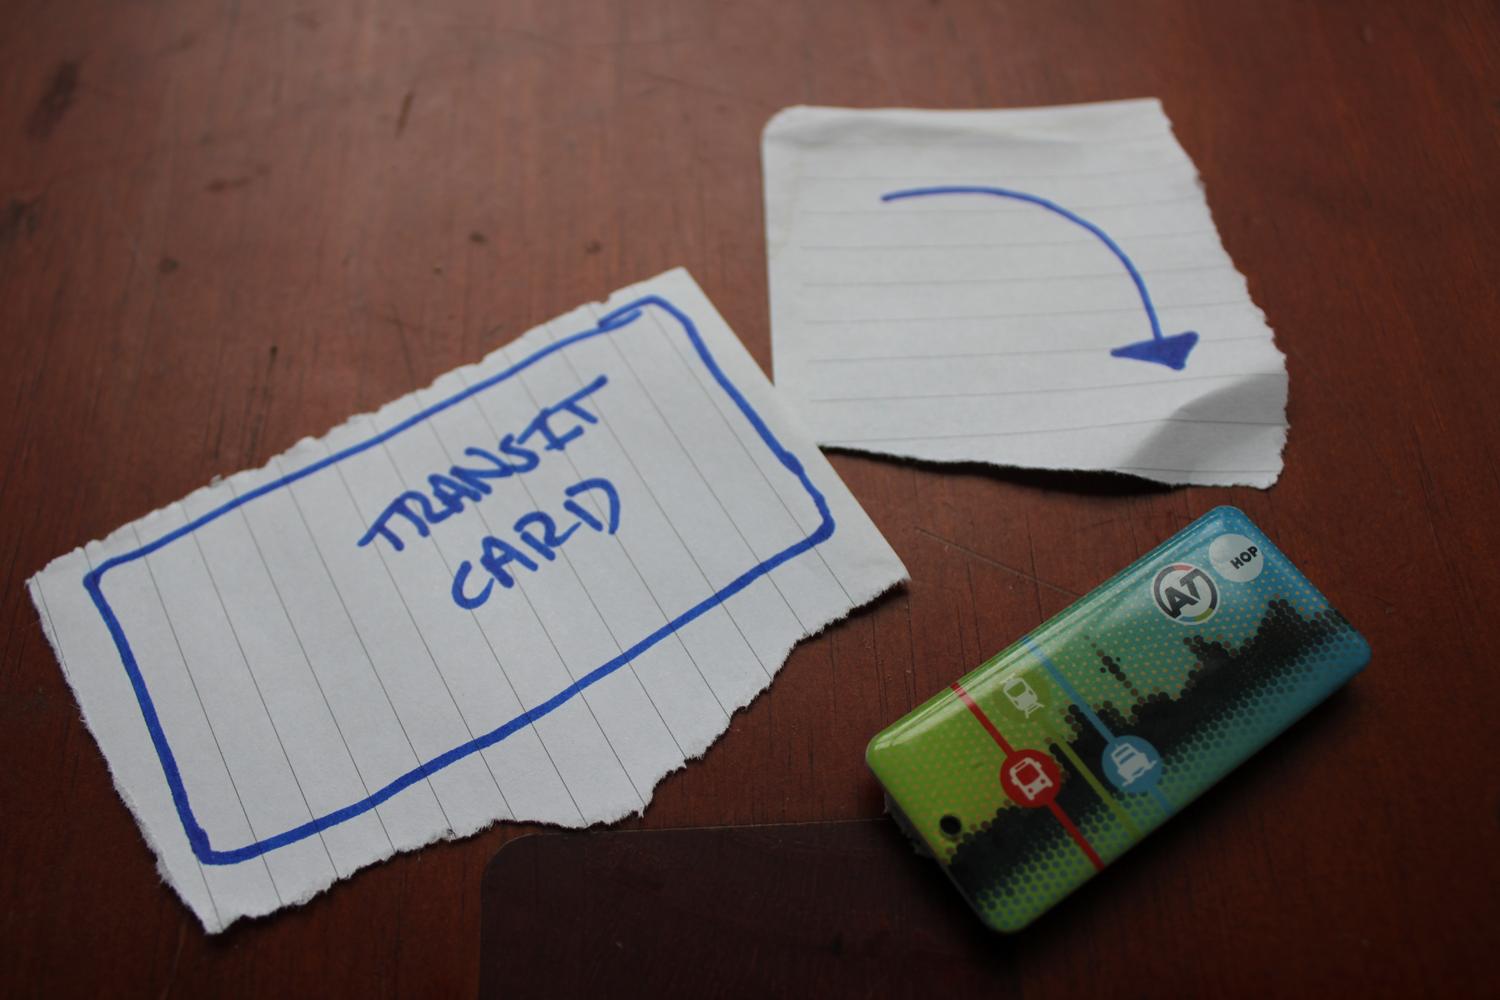 A close up photo of a table surface containing three items: A piece of paper representing my physical transit card, an arrow pointing to the right and a smaller, badge sized transit card designed for keychains. The arrow is supposed to symbolise that I&rsquo;ve gone from one transit card to another.